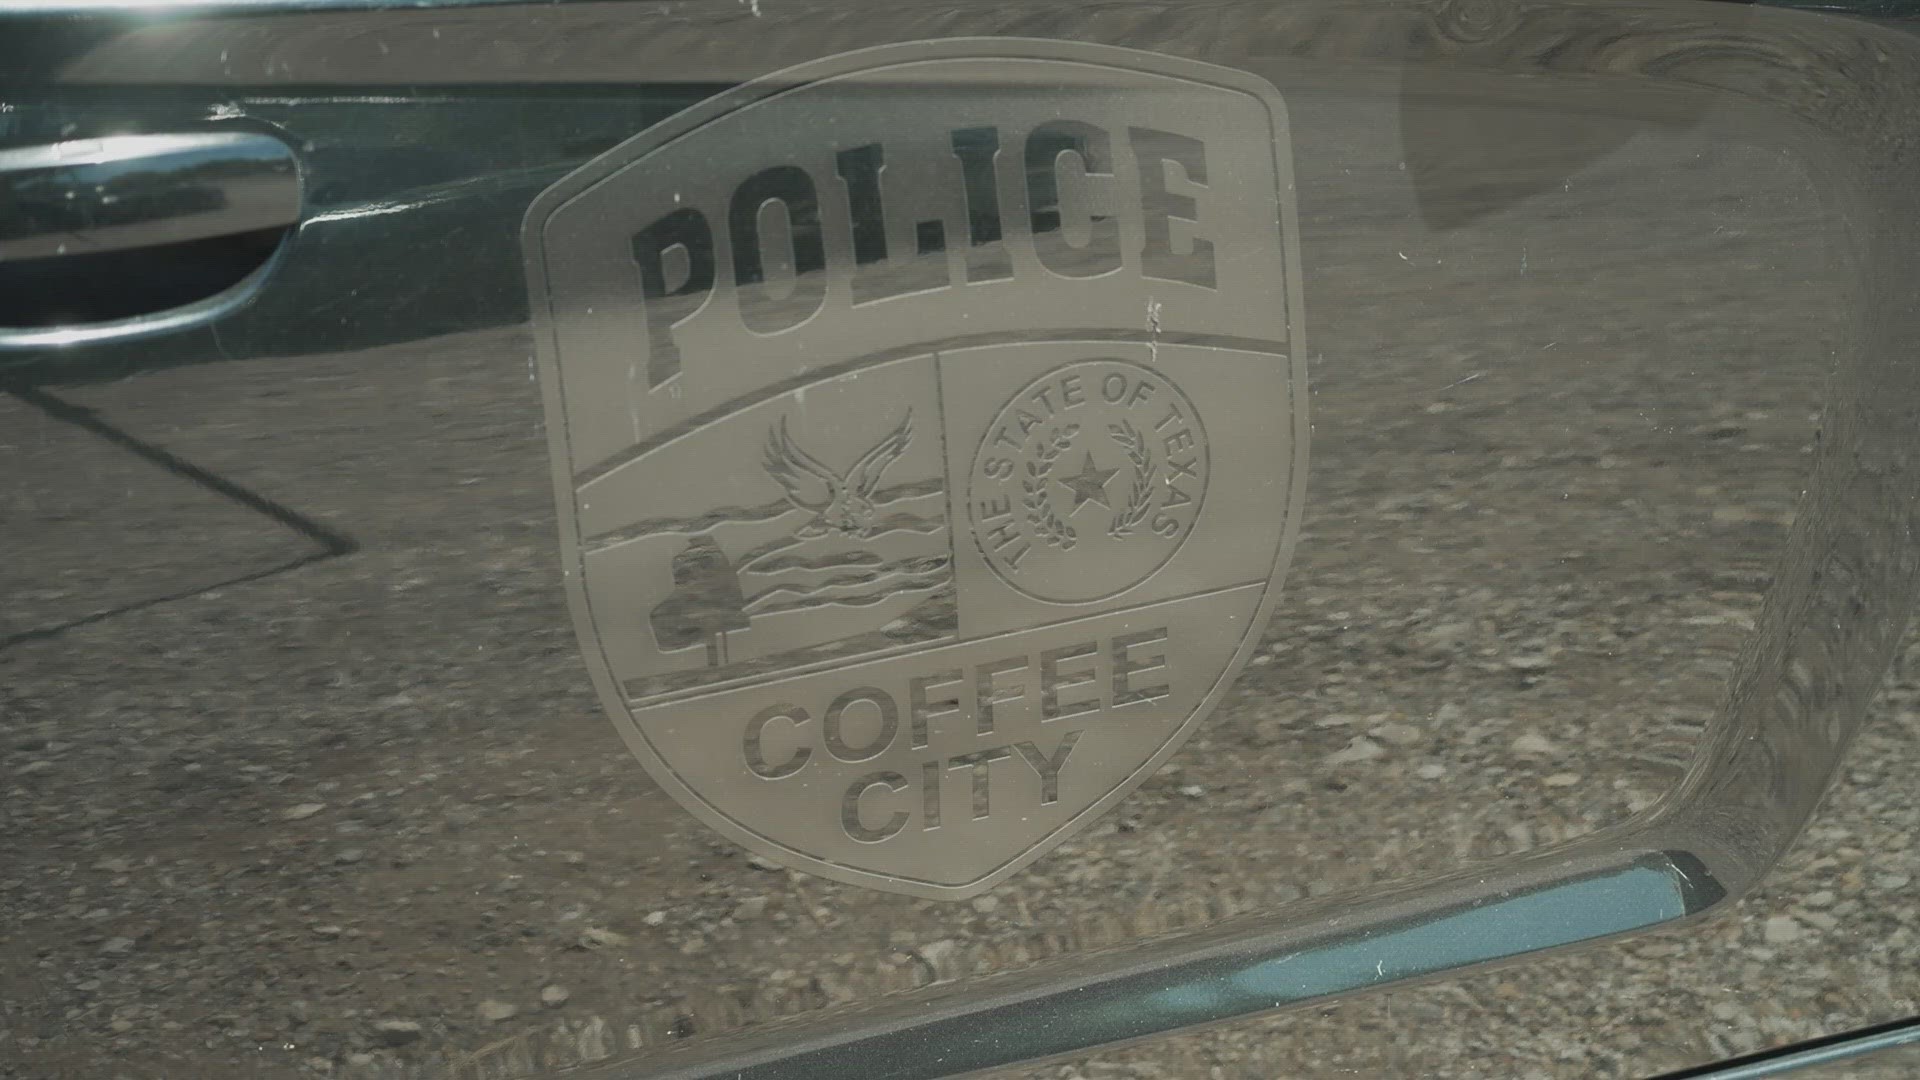 KHOU 11 Investigates discovered more than half of the cops in the Coffee City Police Department had been suspended, demoted or fired from their previous jobs.